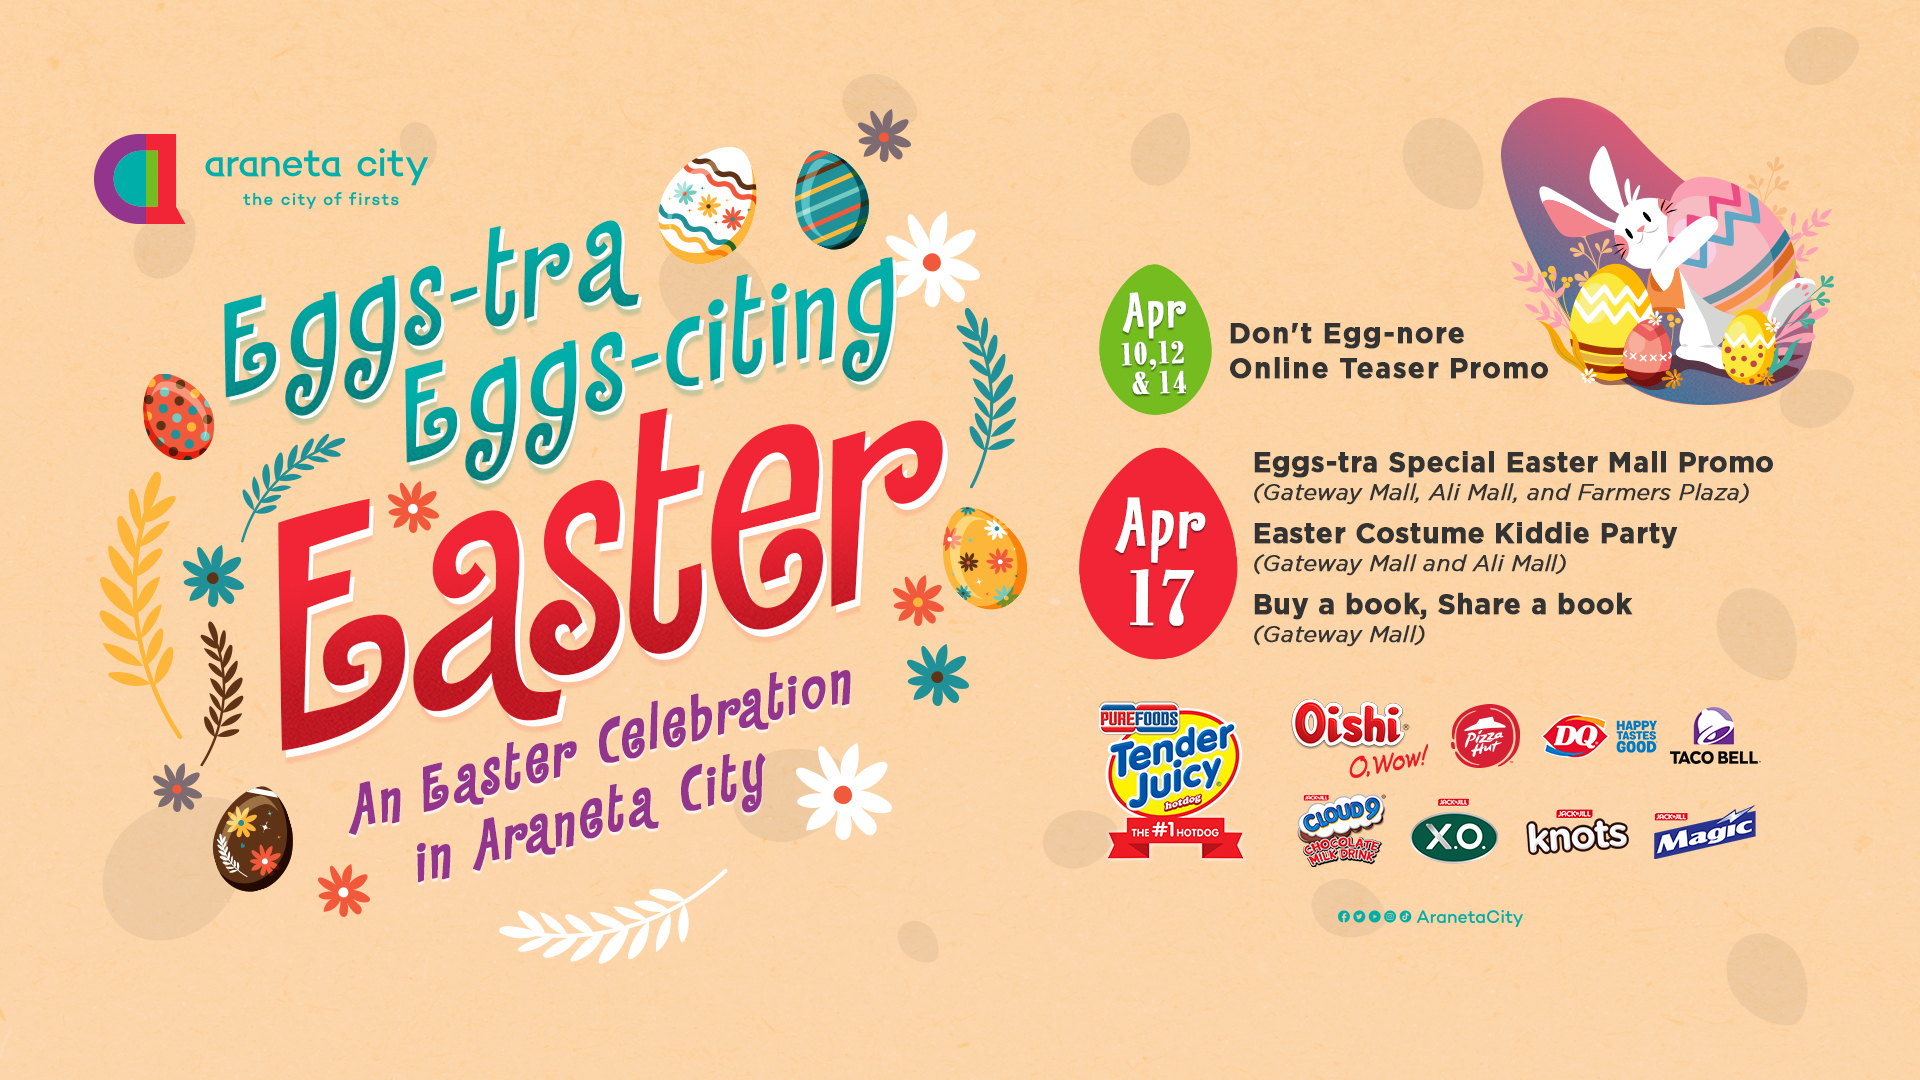 Eggs-tra Special Easter Mall Promo at Araneta City